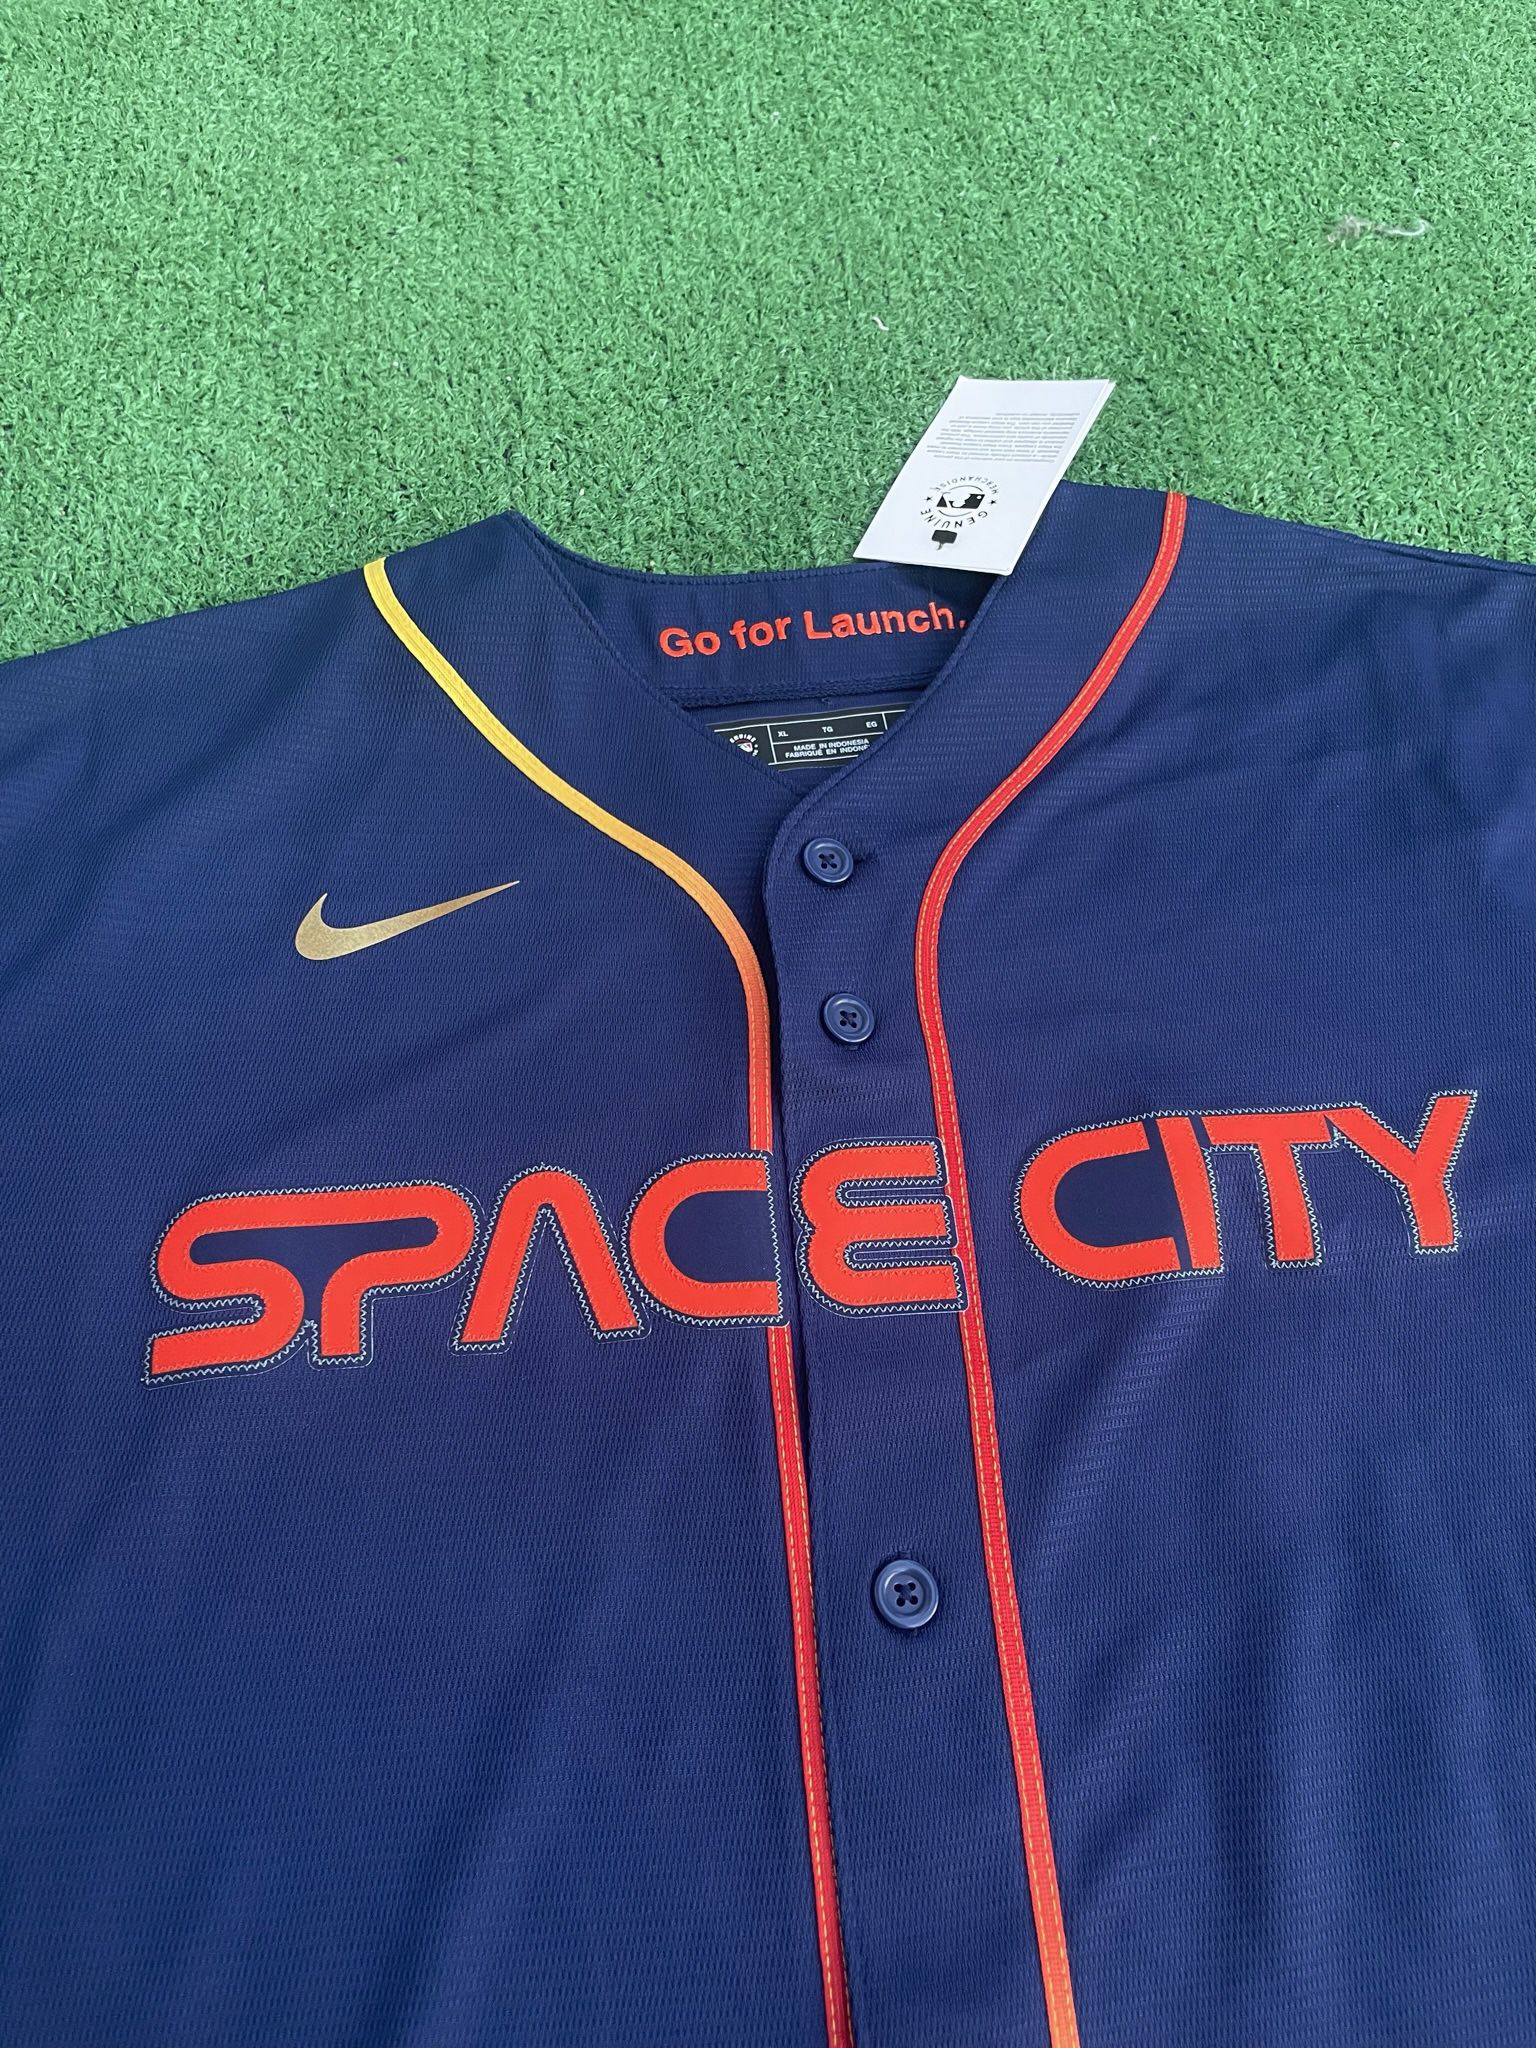 space city houston astros jersey outfit｜TikTok Search